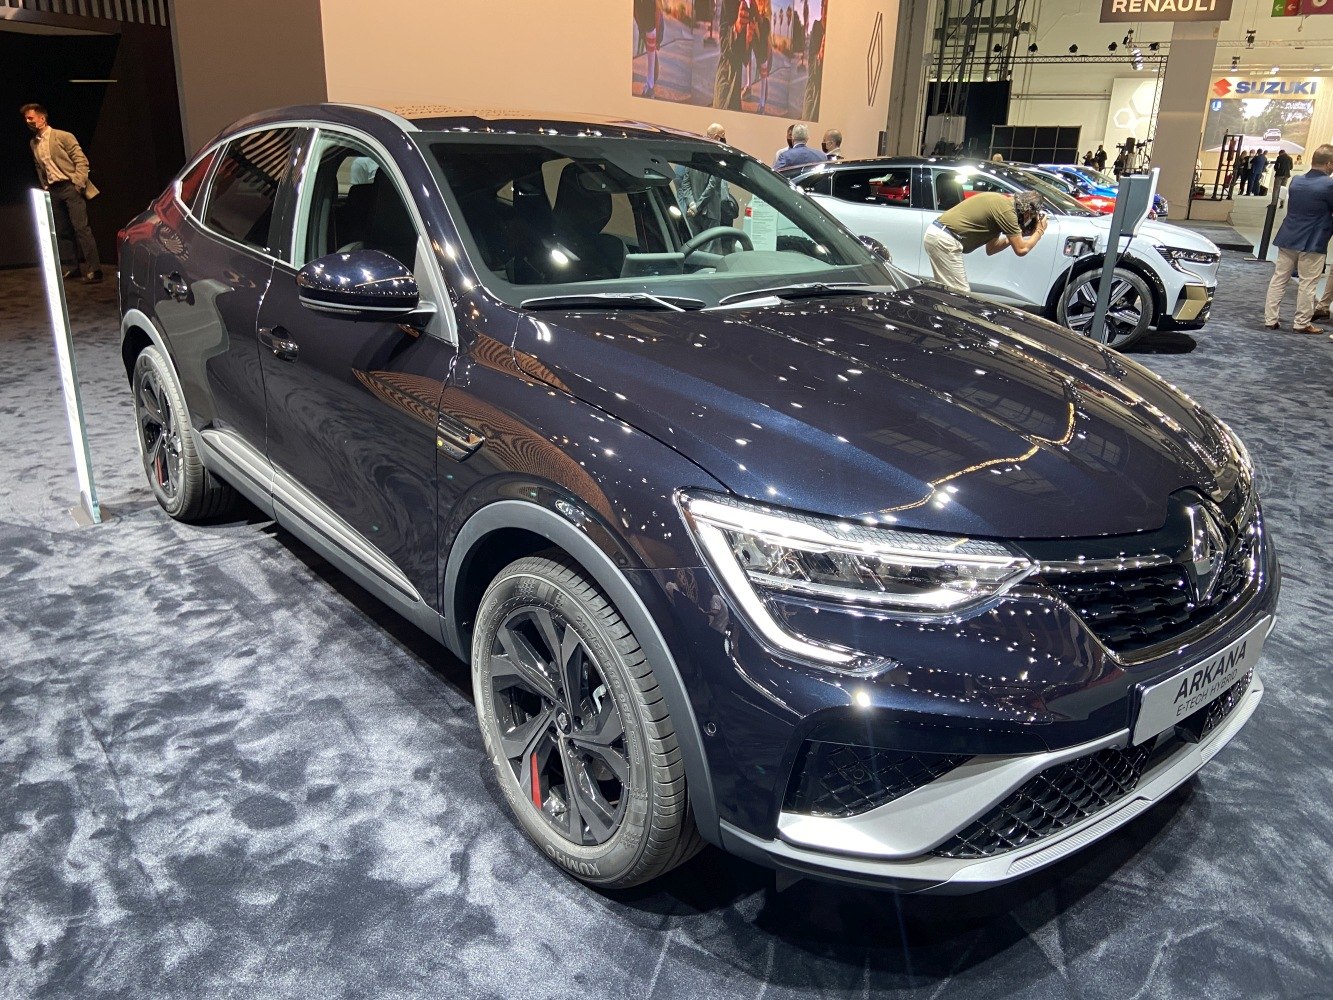 https://totalrenting.es/wp-content/uploads/2022/10/renault-arkana-2019-edition-one-1-3-tce-150-cv-cvt-x-tronic-coupe-crossover.png